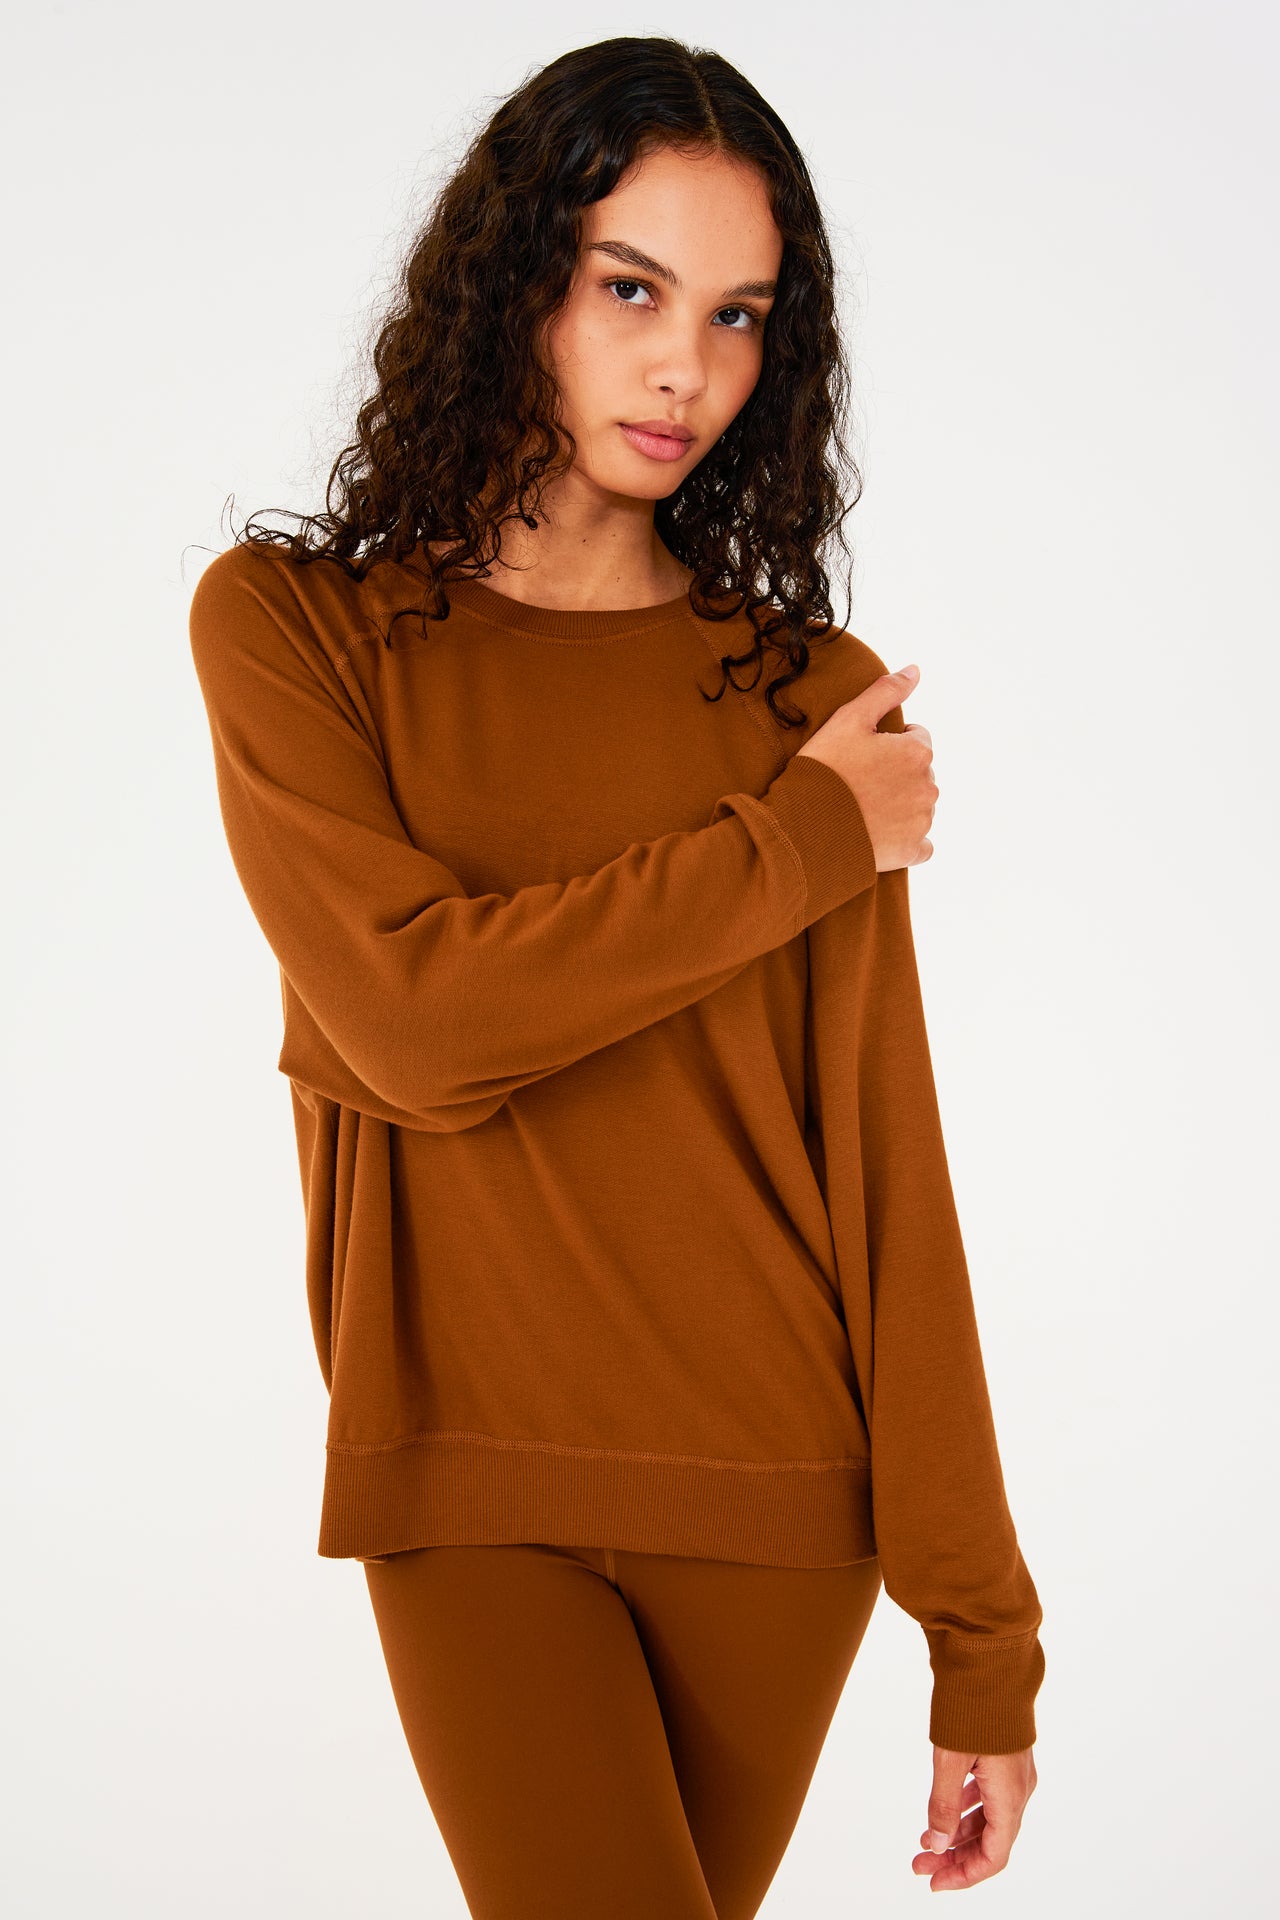 Front view of girl wearing redish brown sweatshirt with visible stitching and ribbed hem